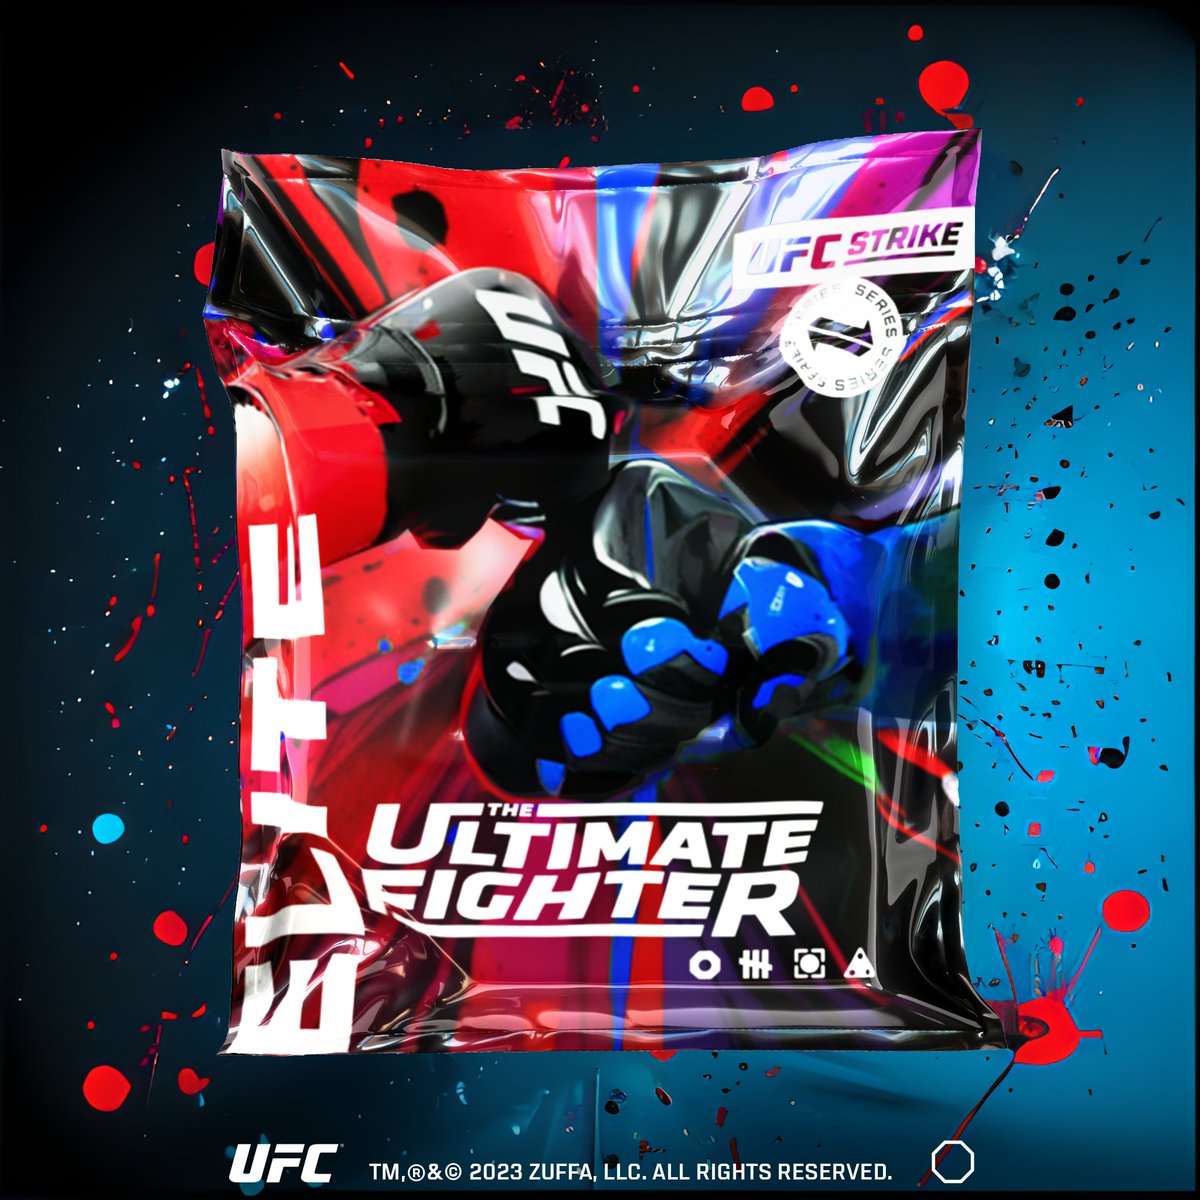 So excited for the TUF Pack from @UFCStrike dropping tomorrow with, among other greats, the brand new @BryanBattle10 moment! Soooo freakin' coool!! #OwntheGlory